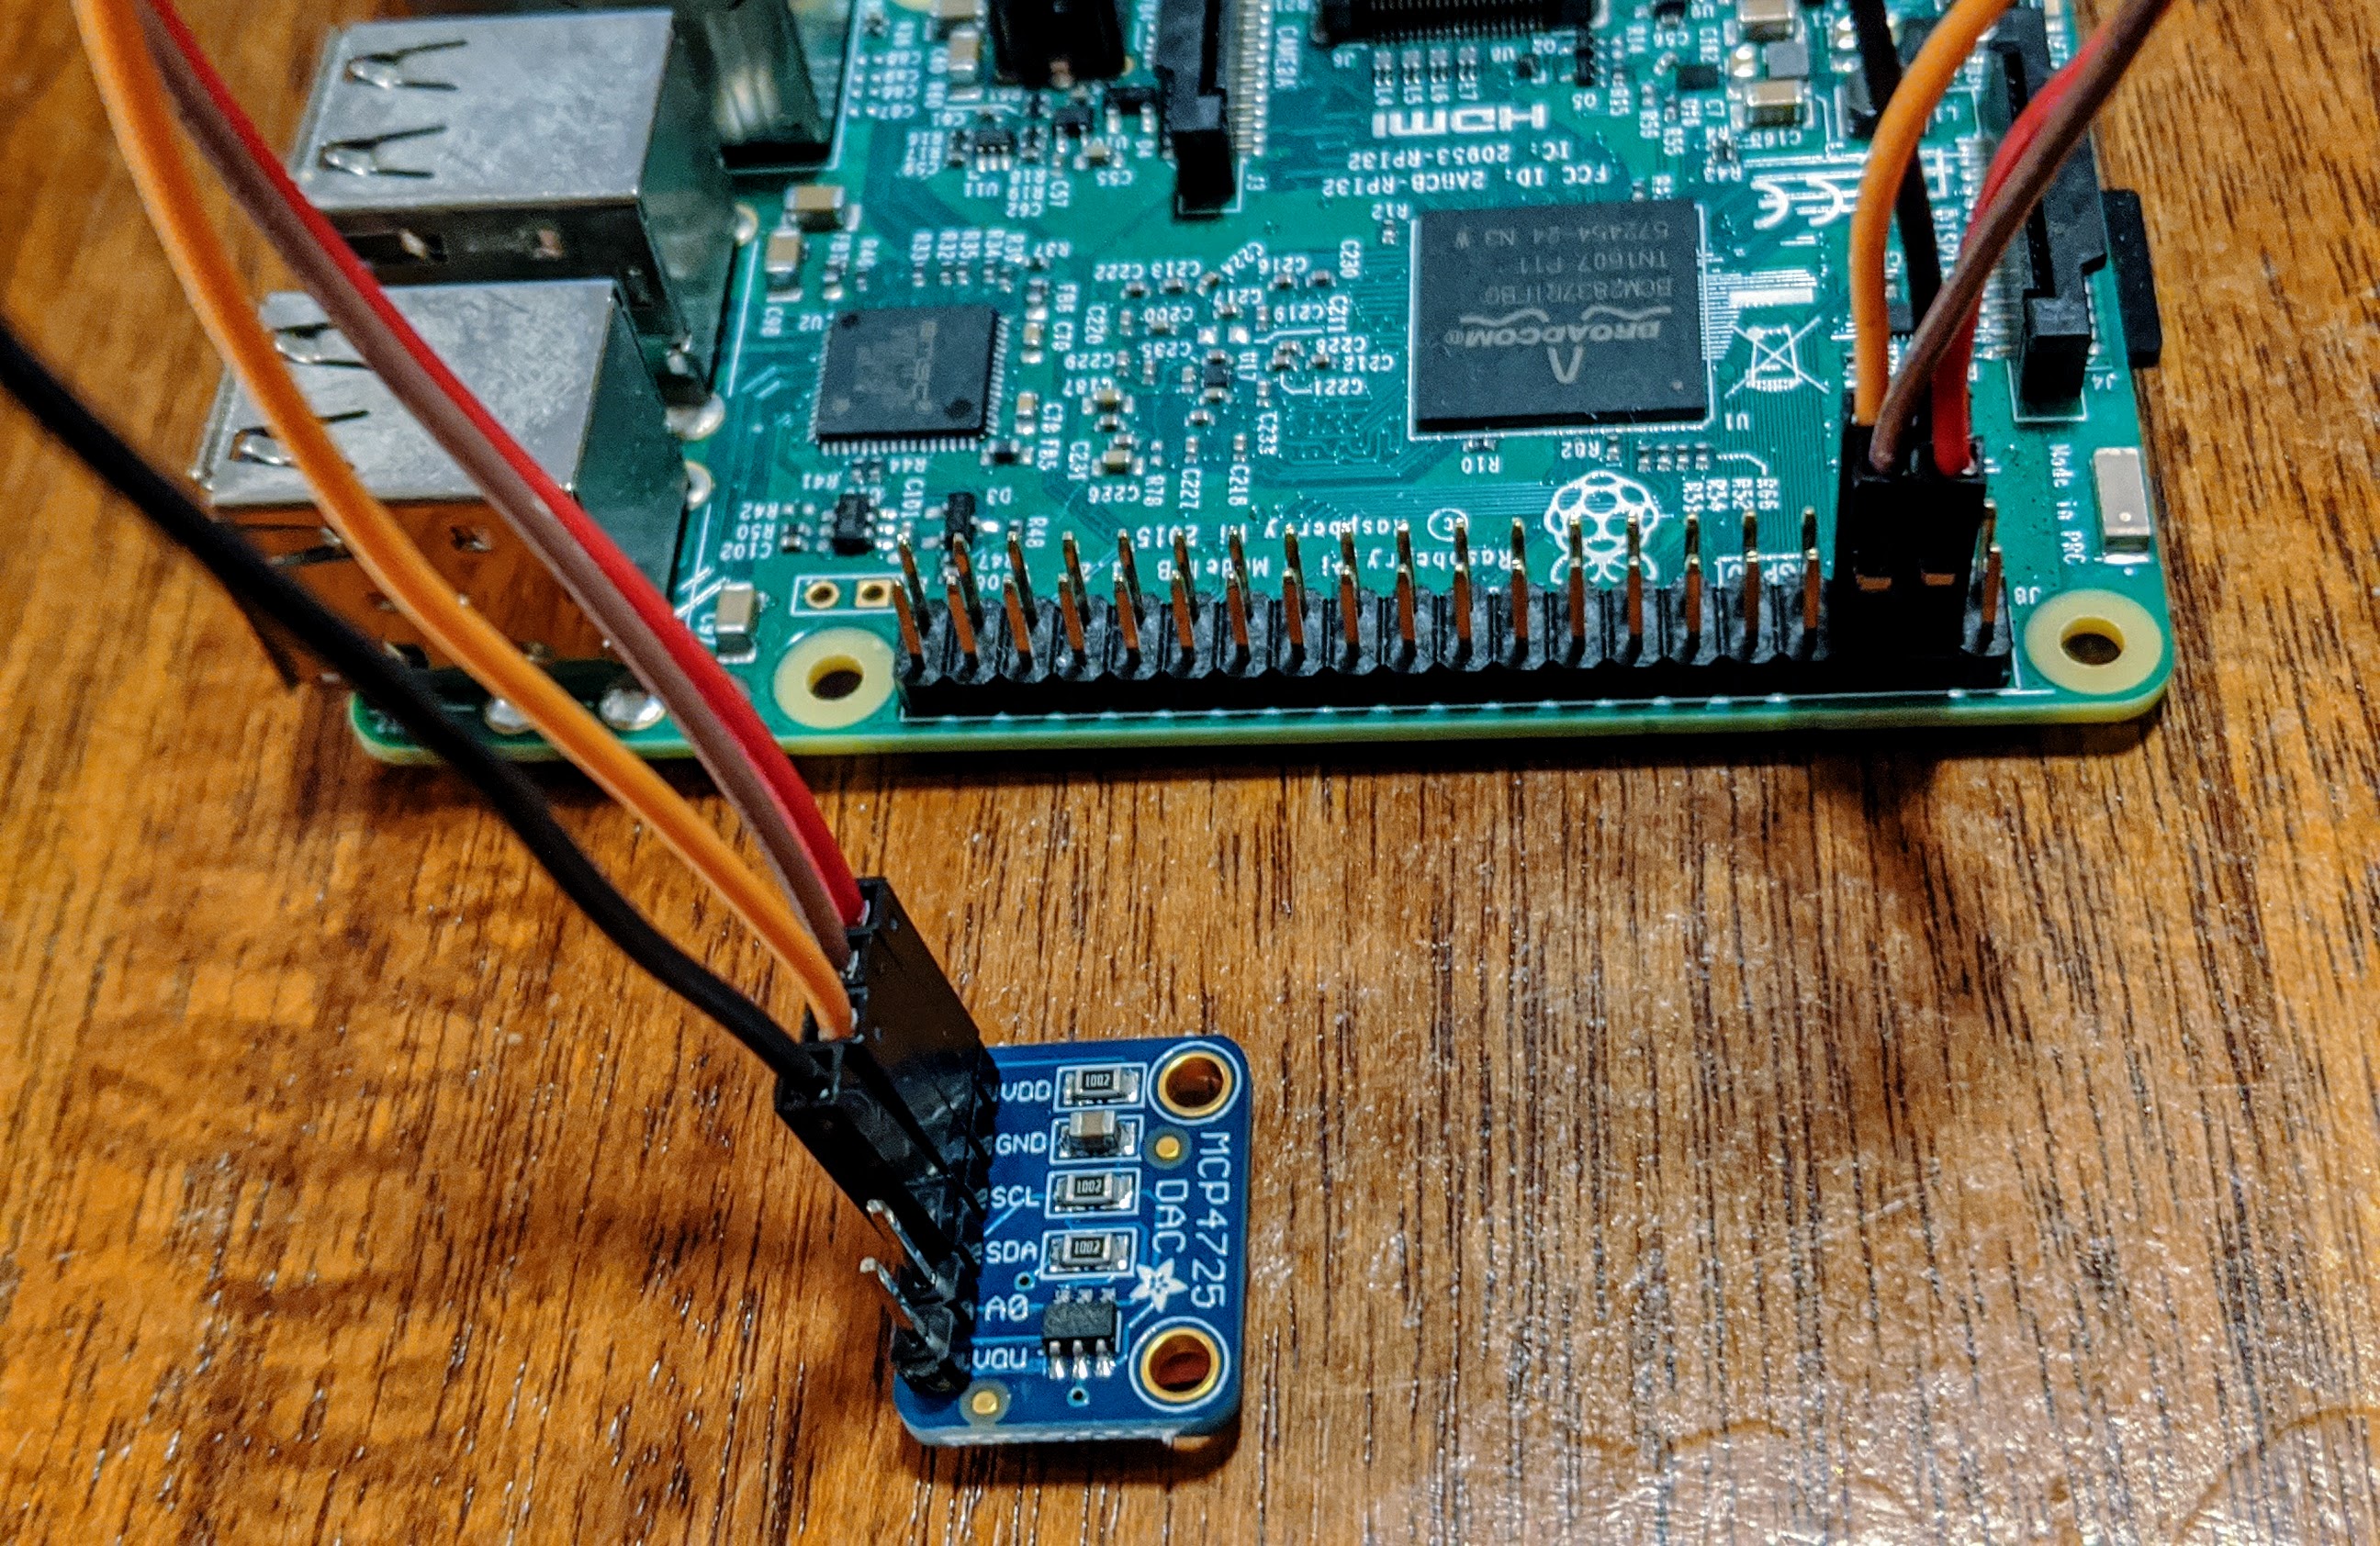 Wiring between the MCP4725 and the Raspberry Pi